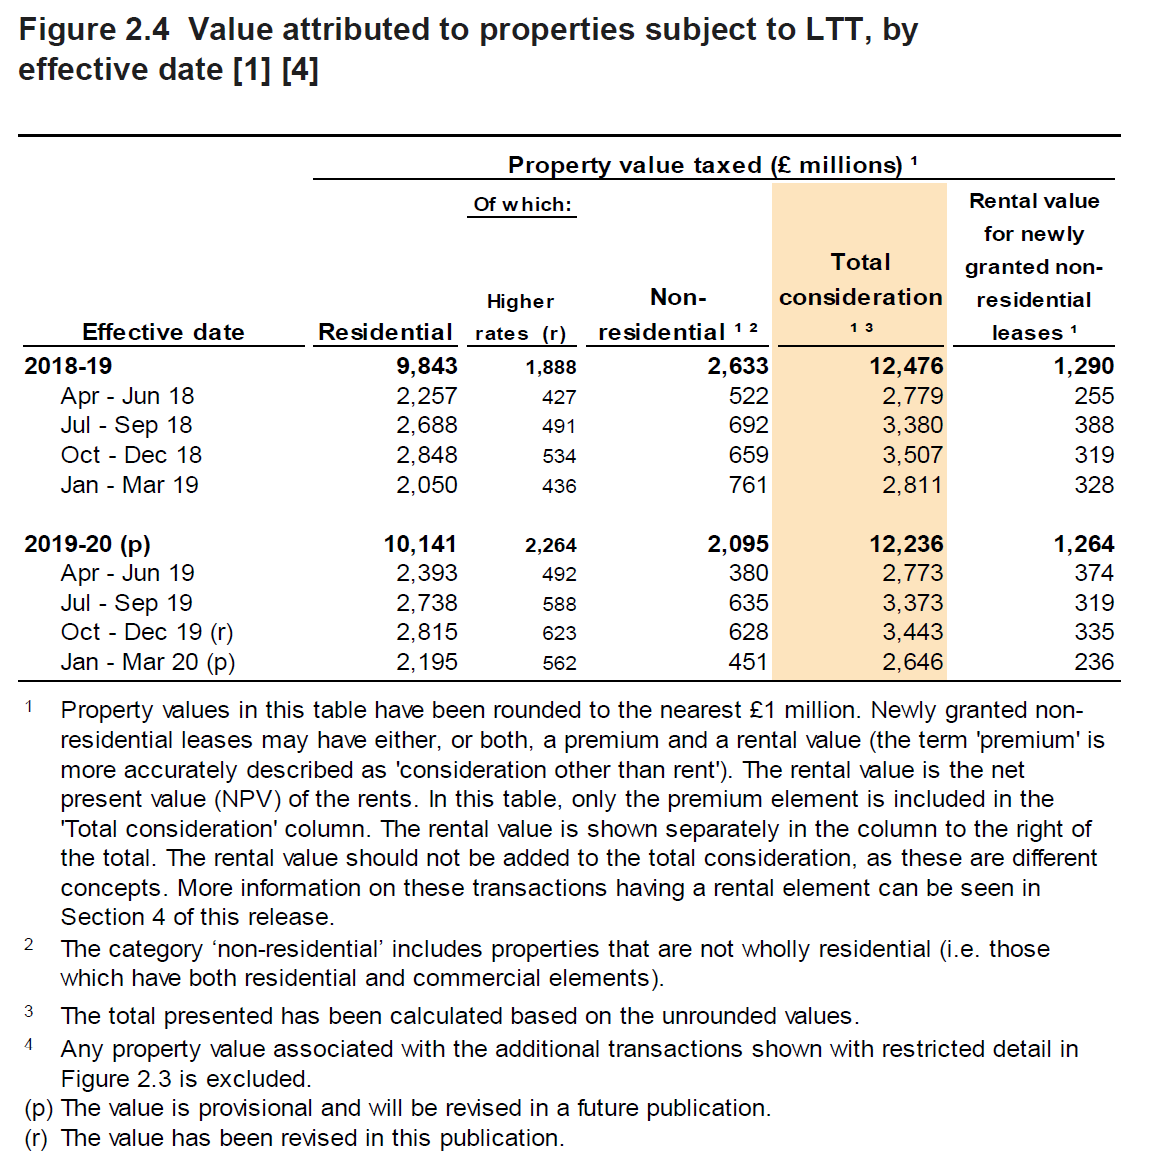 Figure 2.4 shows the value of properties subject to LTT, by the quarter and year in which the transactions were effective. Figure 2.4 also shows a breakdown for residential and non-residential transactions, and separate figures for the rental value of newly granted non-residential leases.